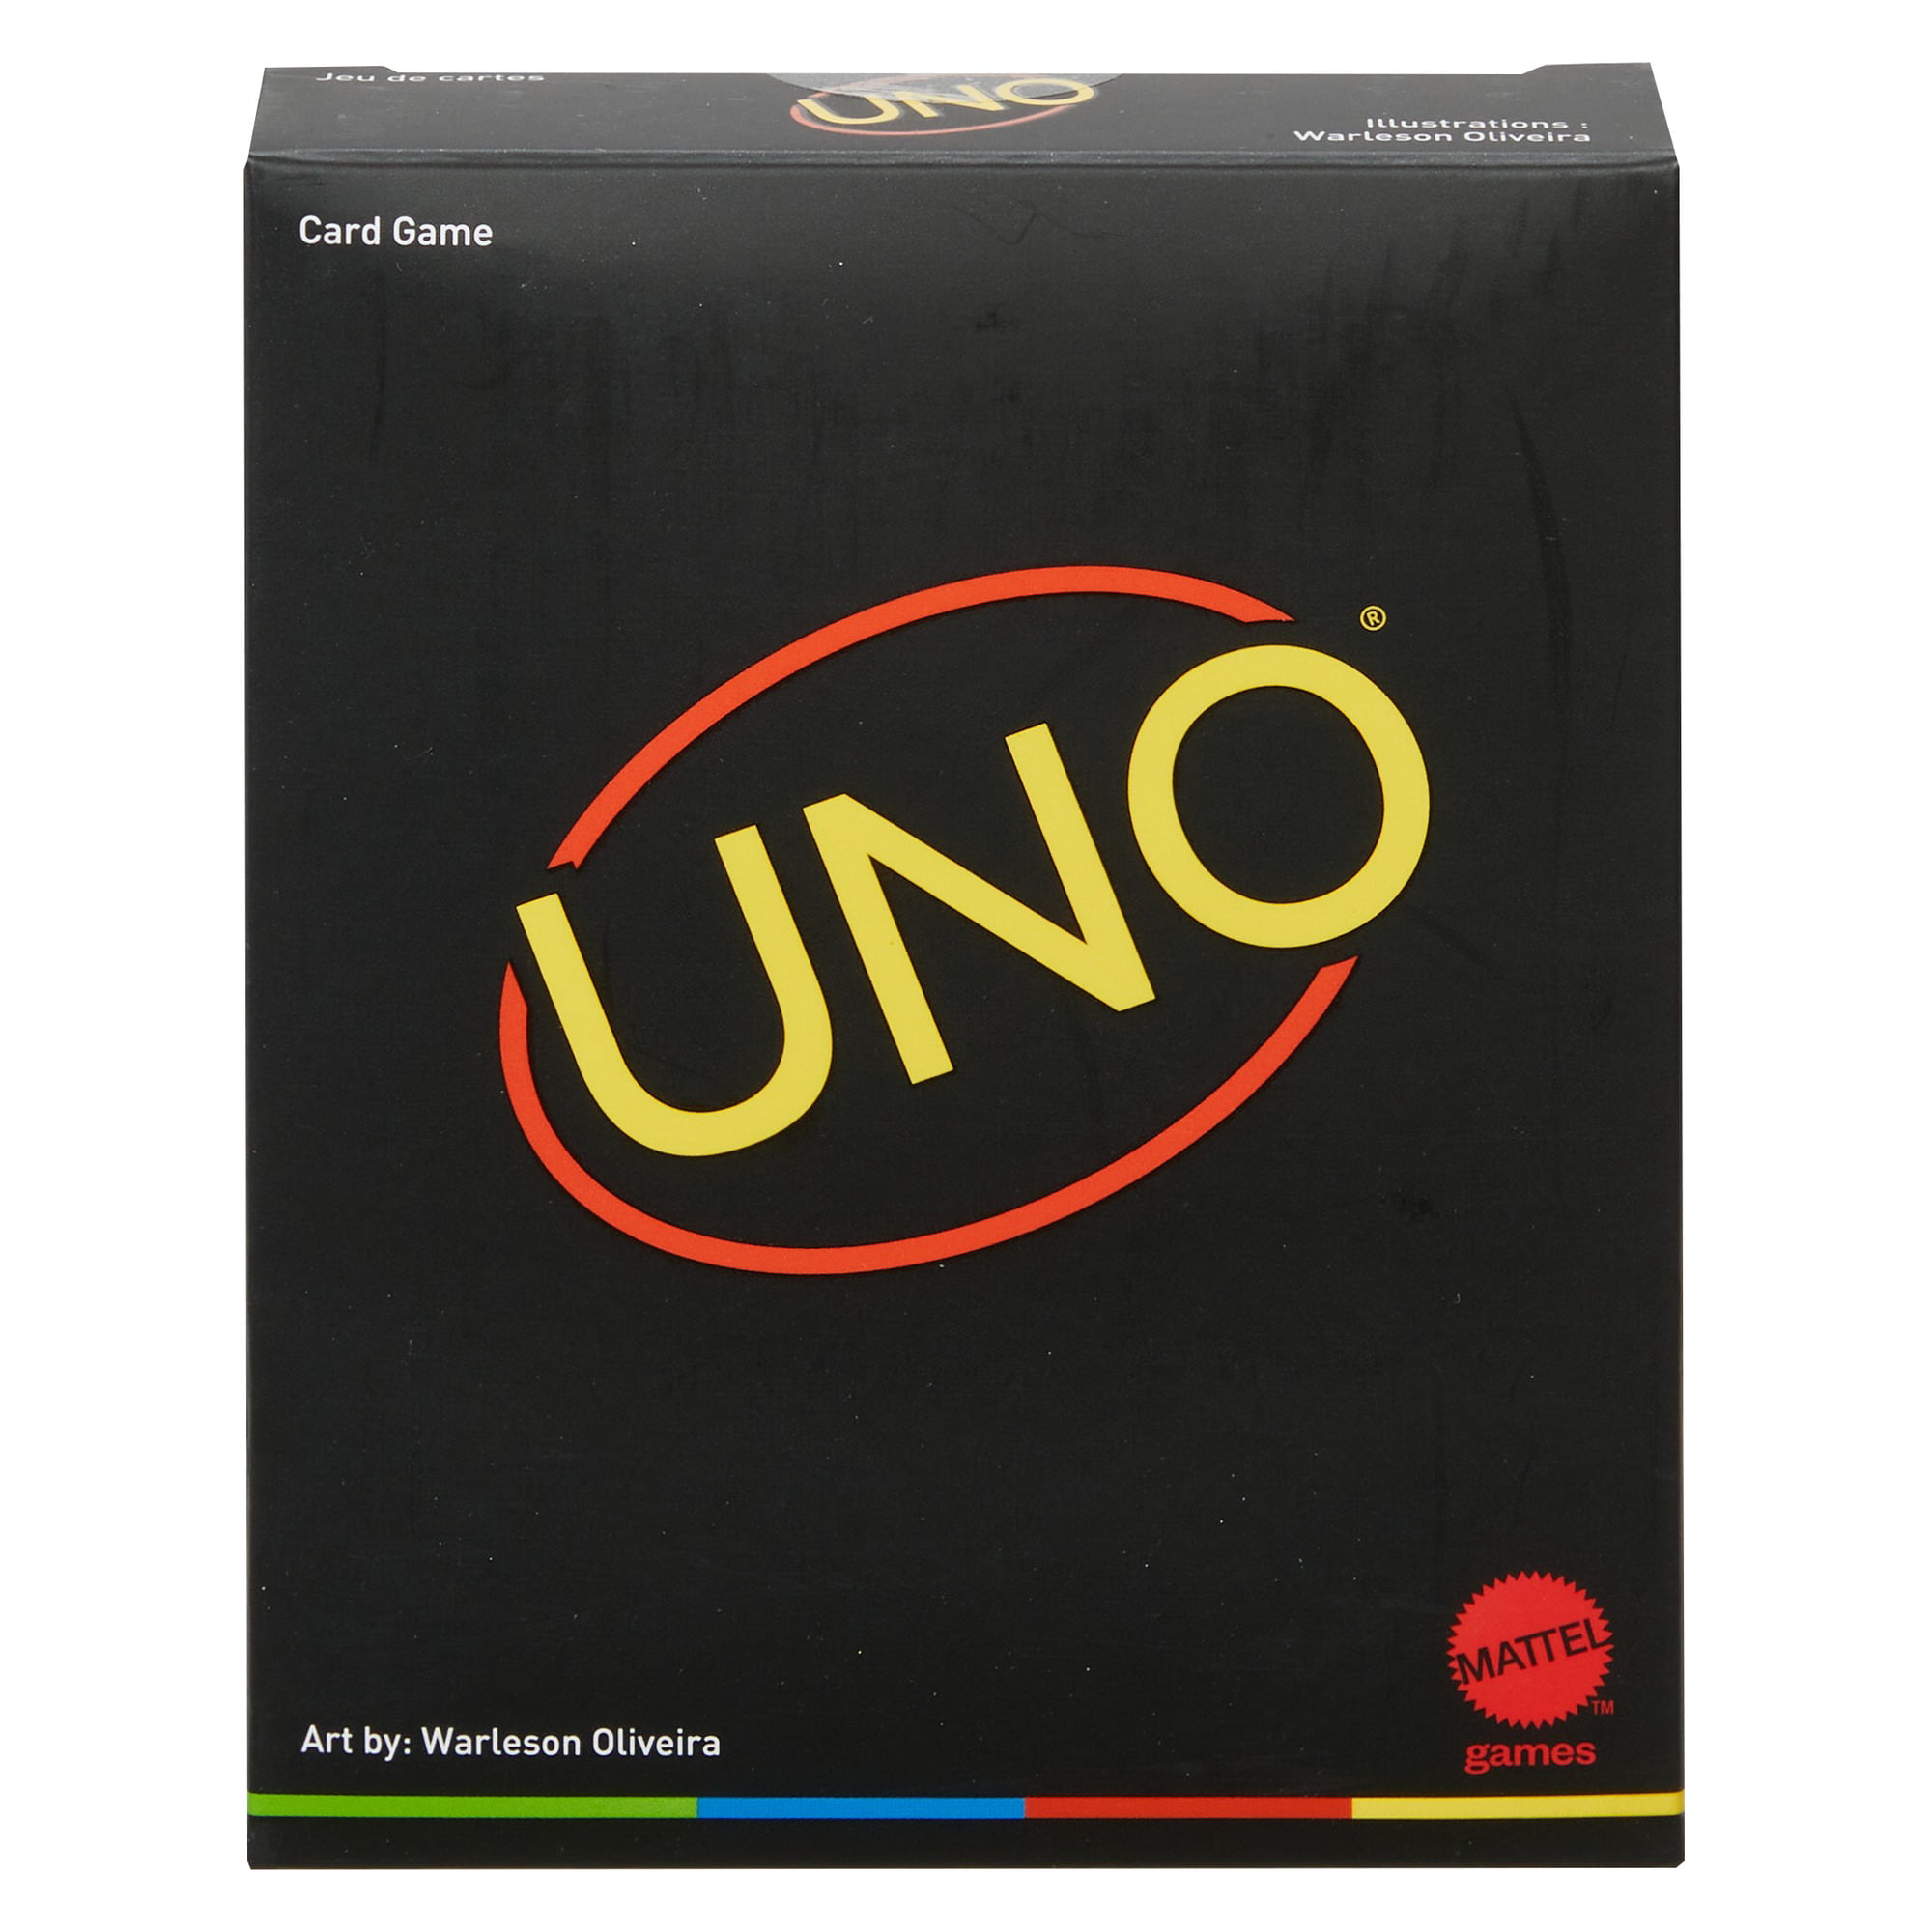 4 UNO 50th Anniversary Edition Card Games Gold Coin Mattel in Hand for sale online 